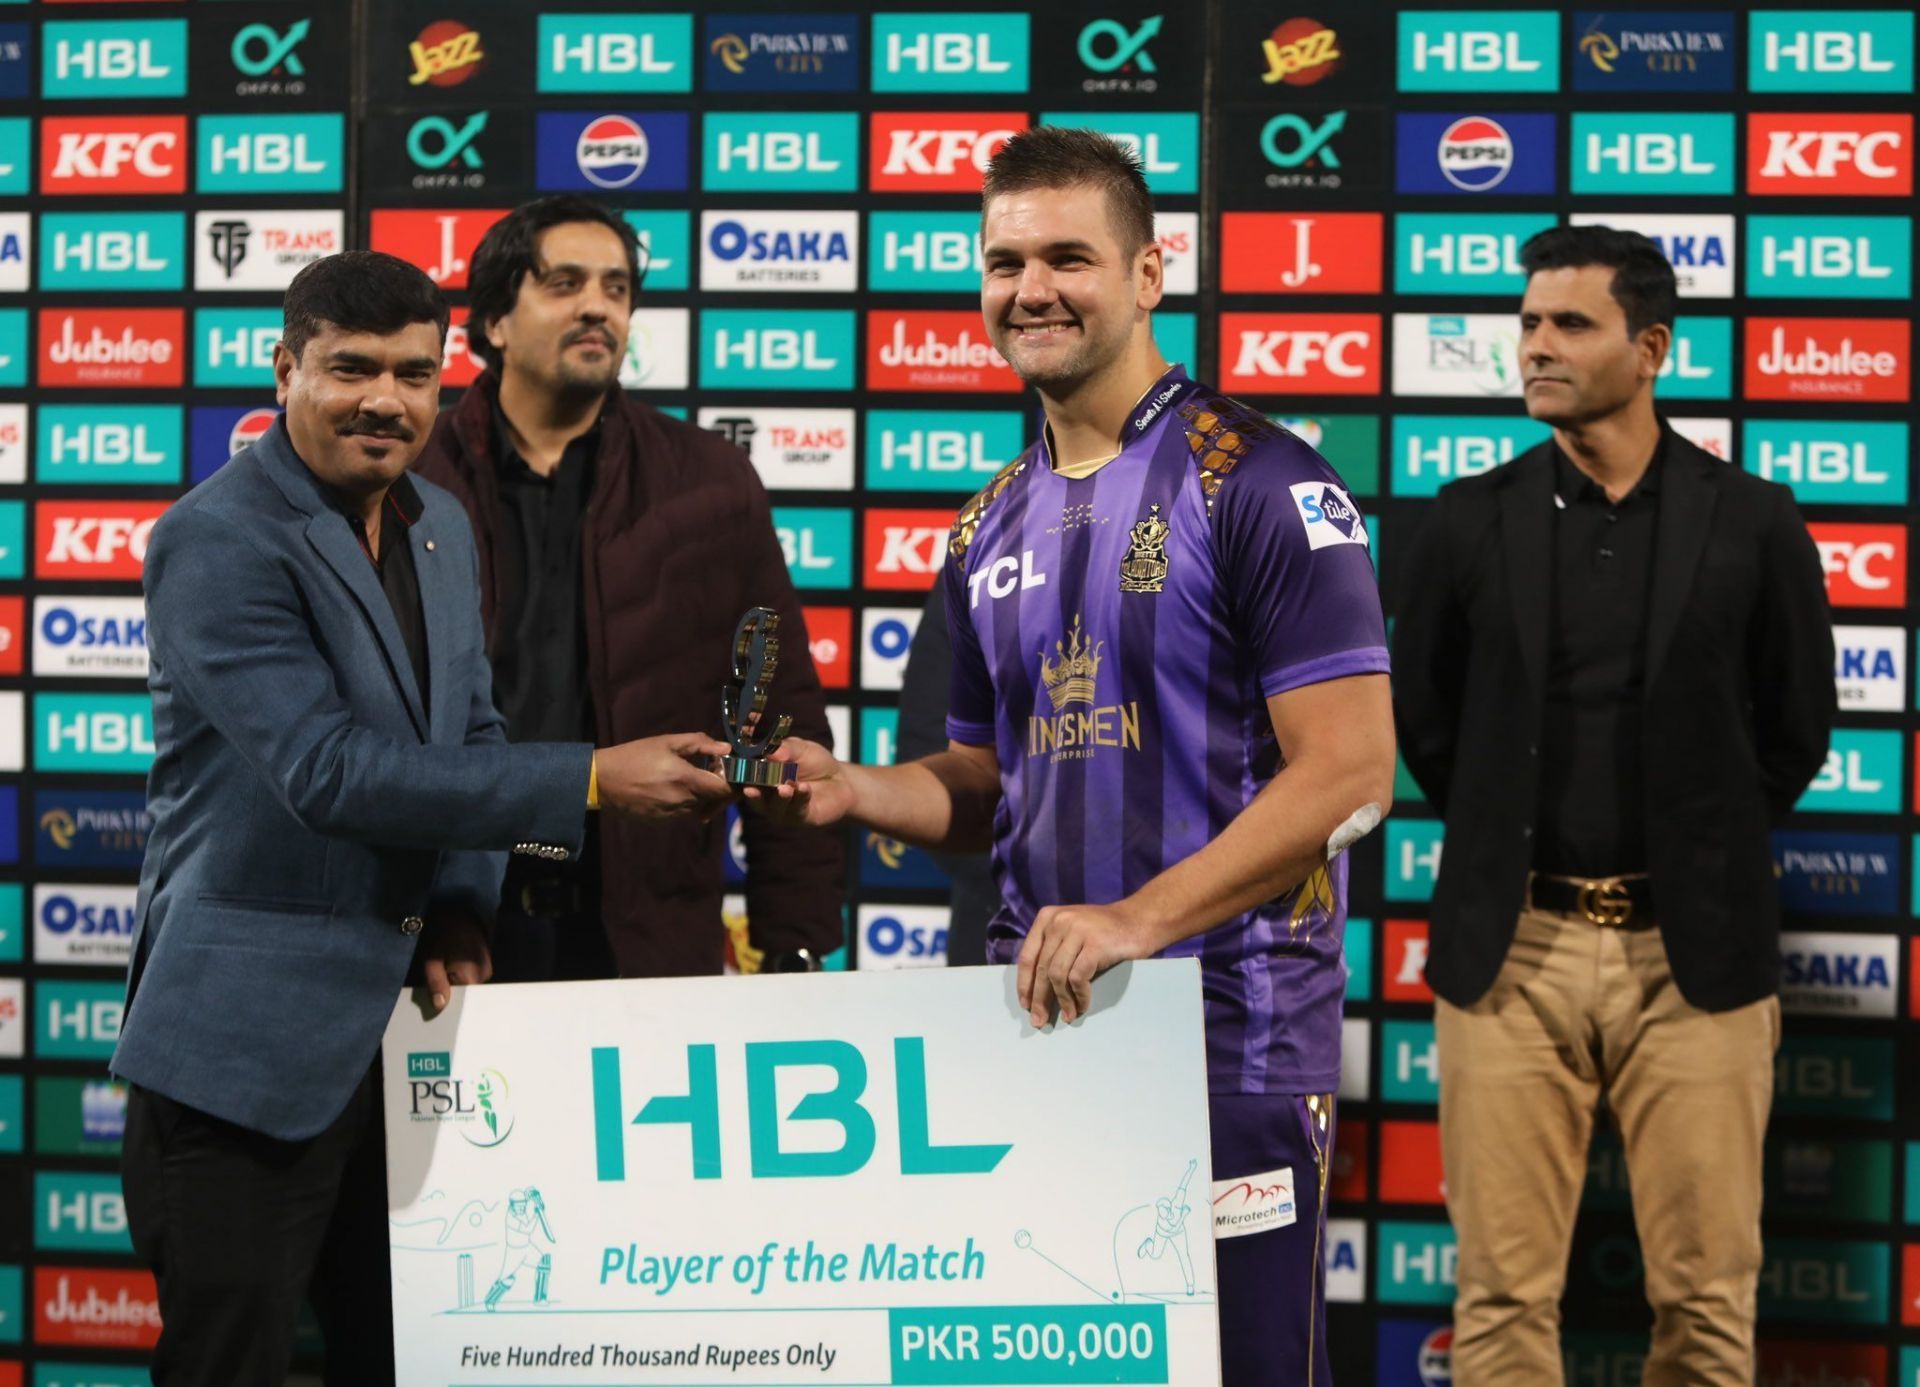 Rilee Rossouw got the Player of the Match award. (Credits: Twitter)